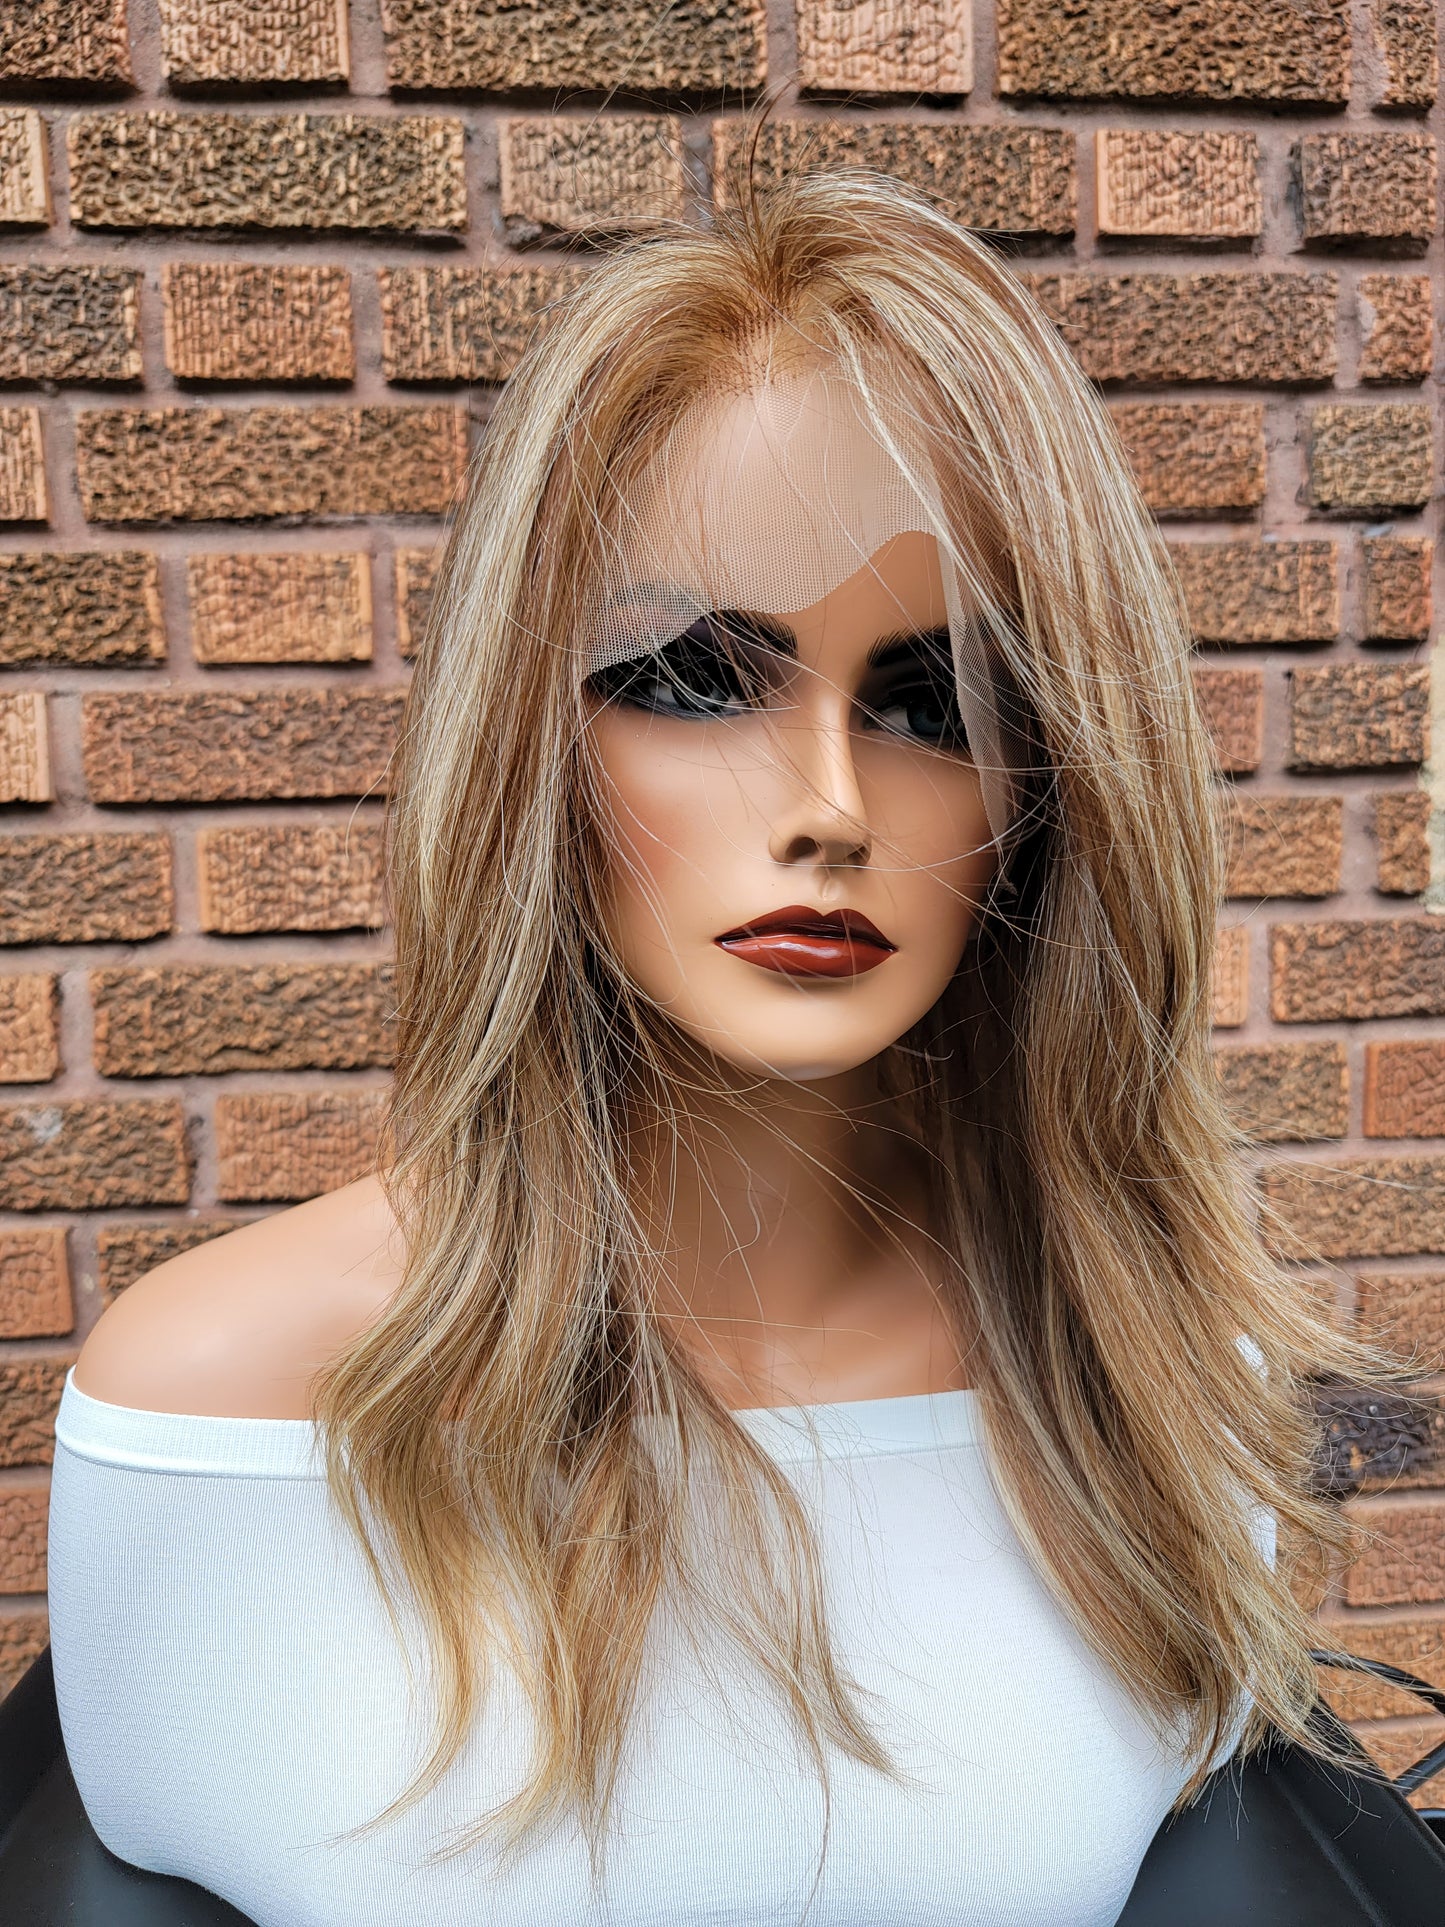 14 in. Full Lace Handtied Human Hair Wig. Warm Brown with Blonde Highlights. MEDIUM Cap.